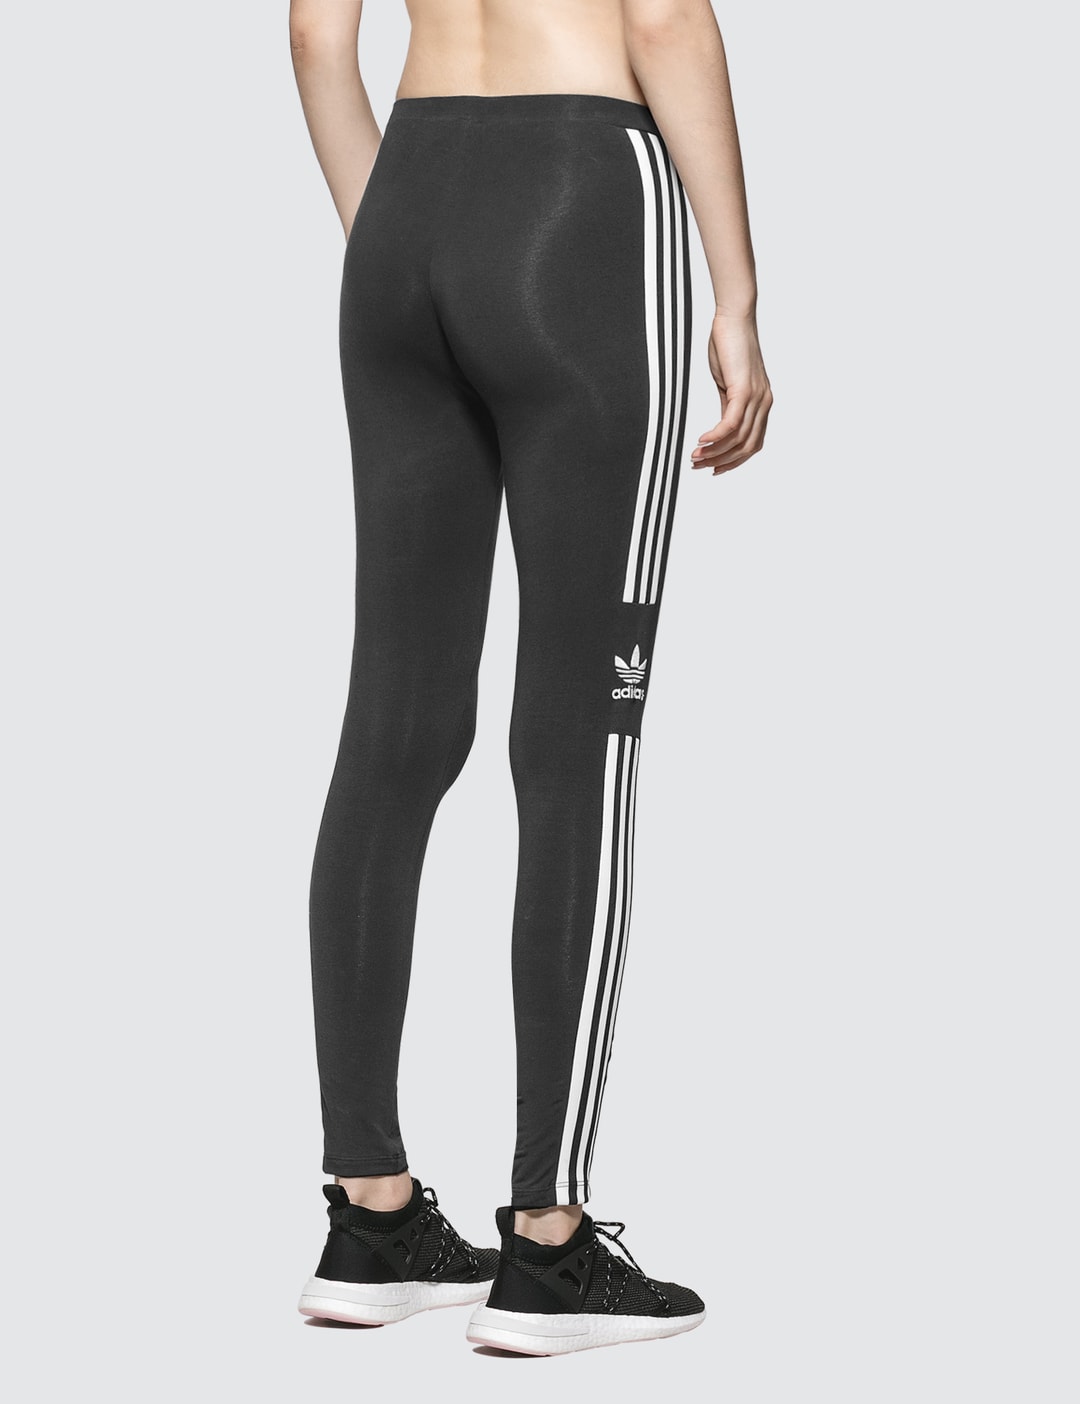 Adidas Originals - Trefoil Tight | HBX - Globally Curated Fashion and ...